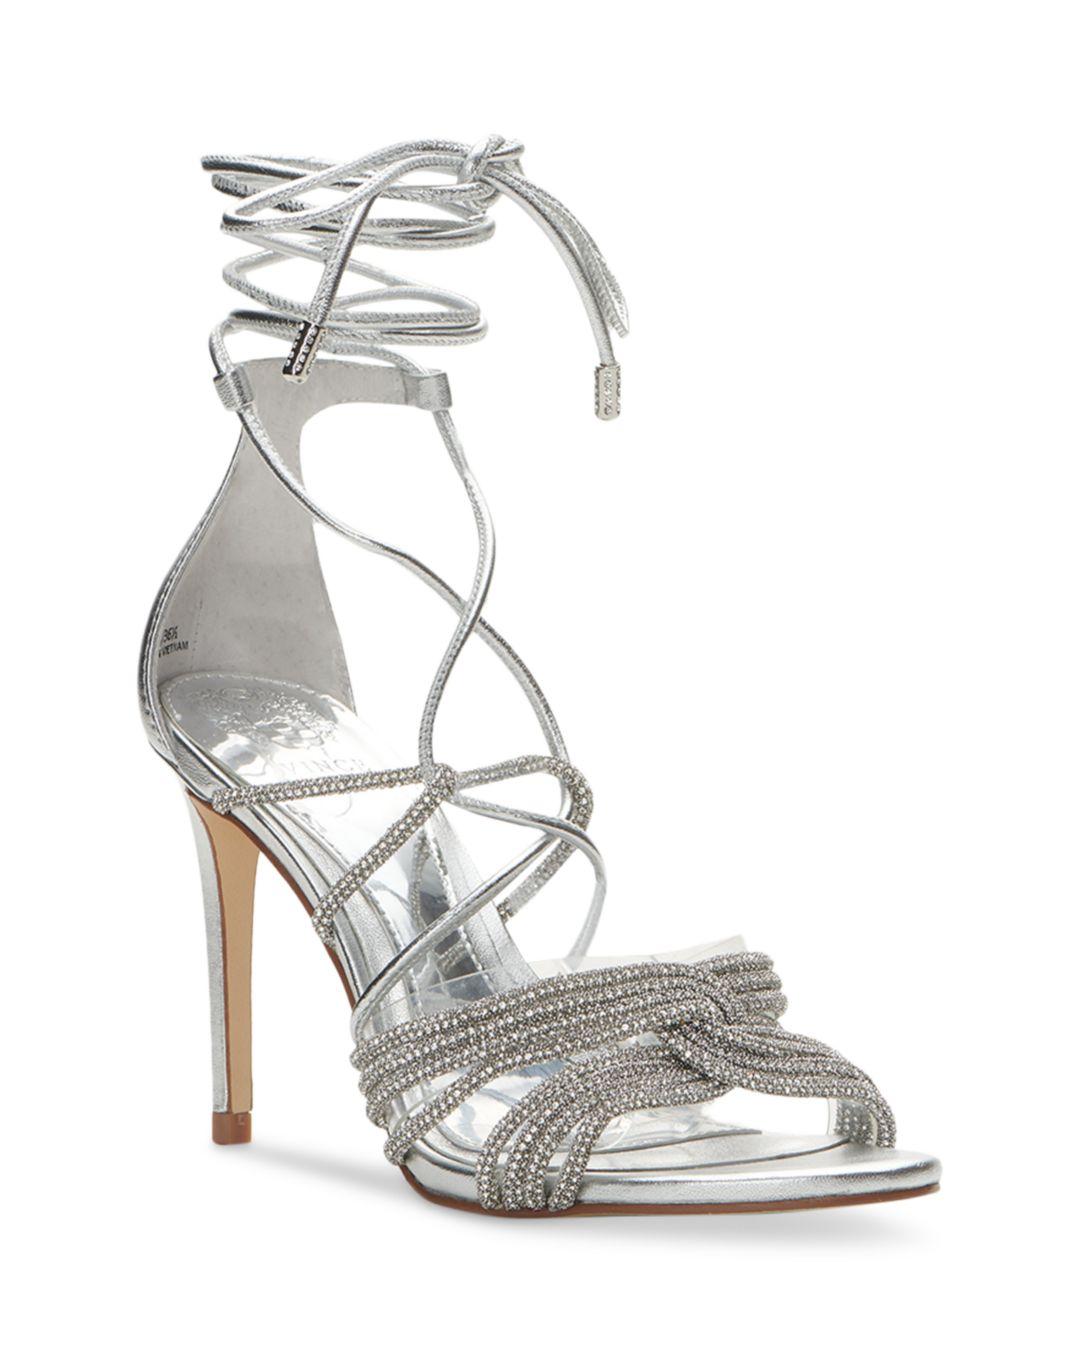 Vince Camuto Aimery Crystal Strappy High Heel Sandals in Metallic | Lyst